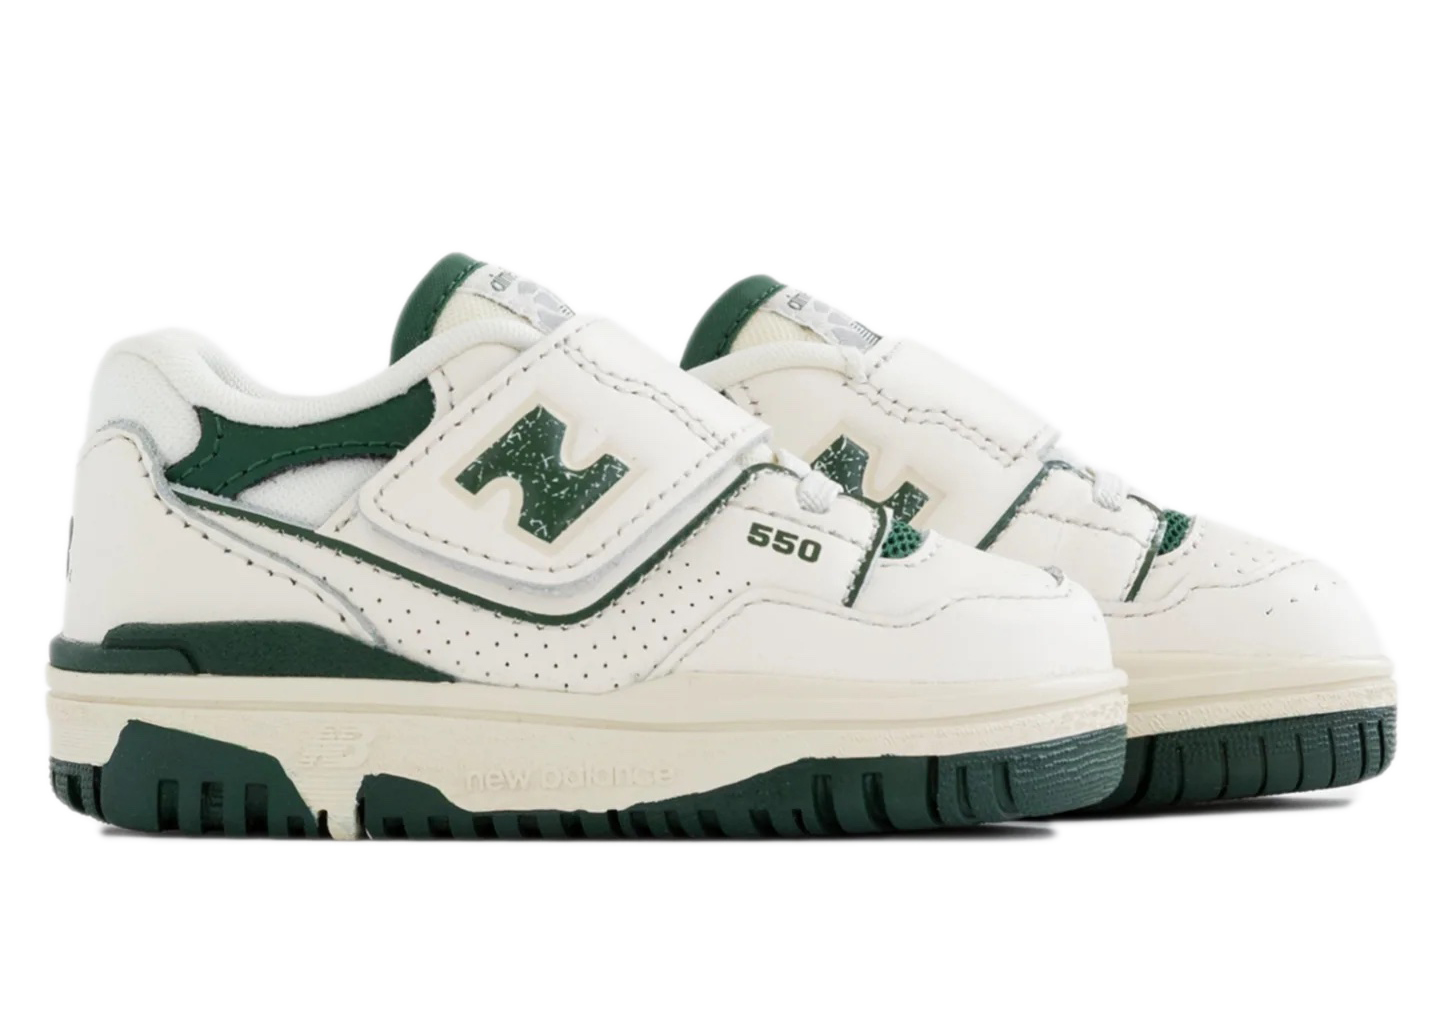 New Balance 550 Aime Leon Dore White Green (TD) Toddler - Sneakers 